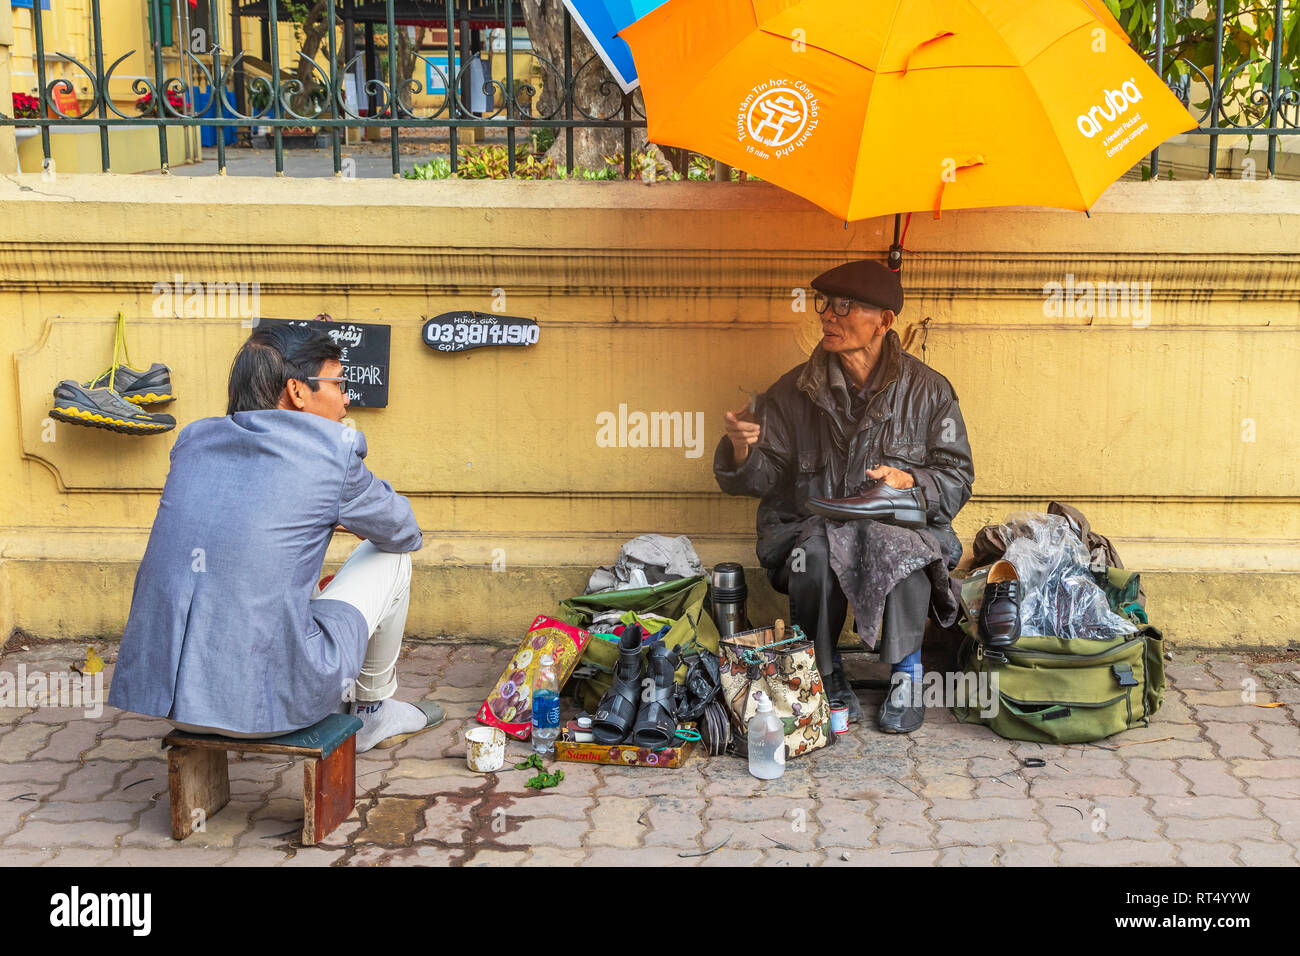 Business man having his shoes cleaned by a street trader in Hanoi Old Quarter, Ha Noi, Vietnam, Asia Stock Photo